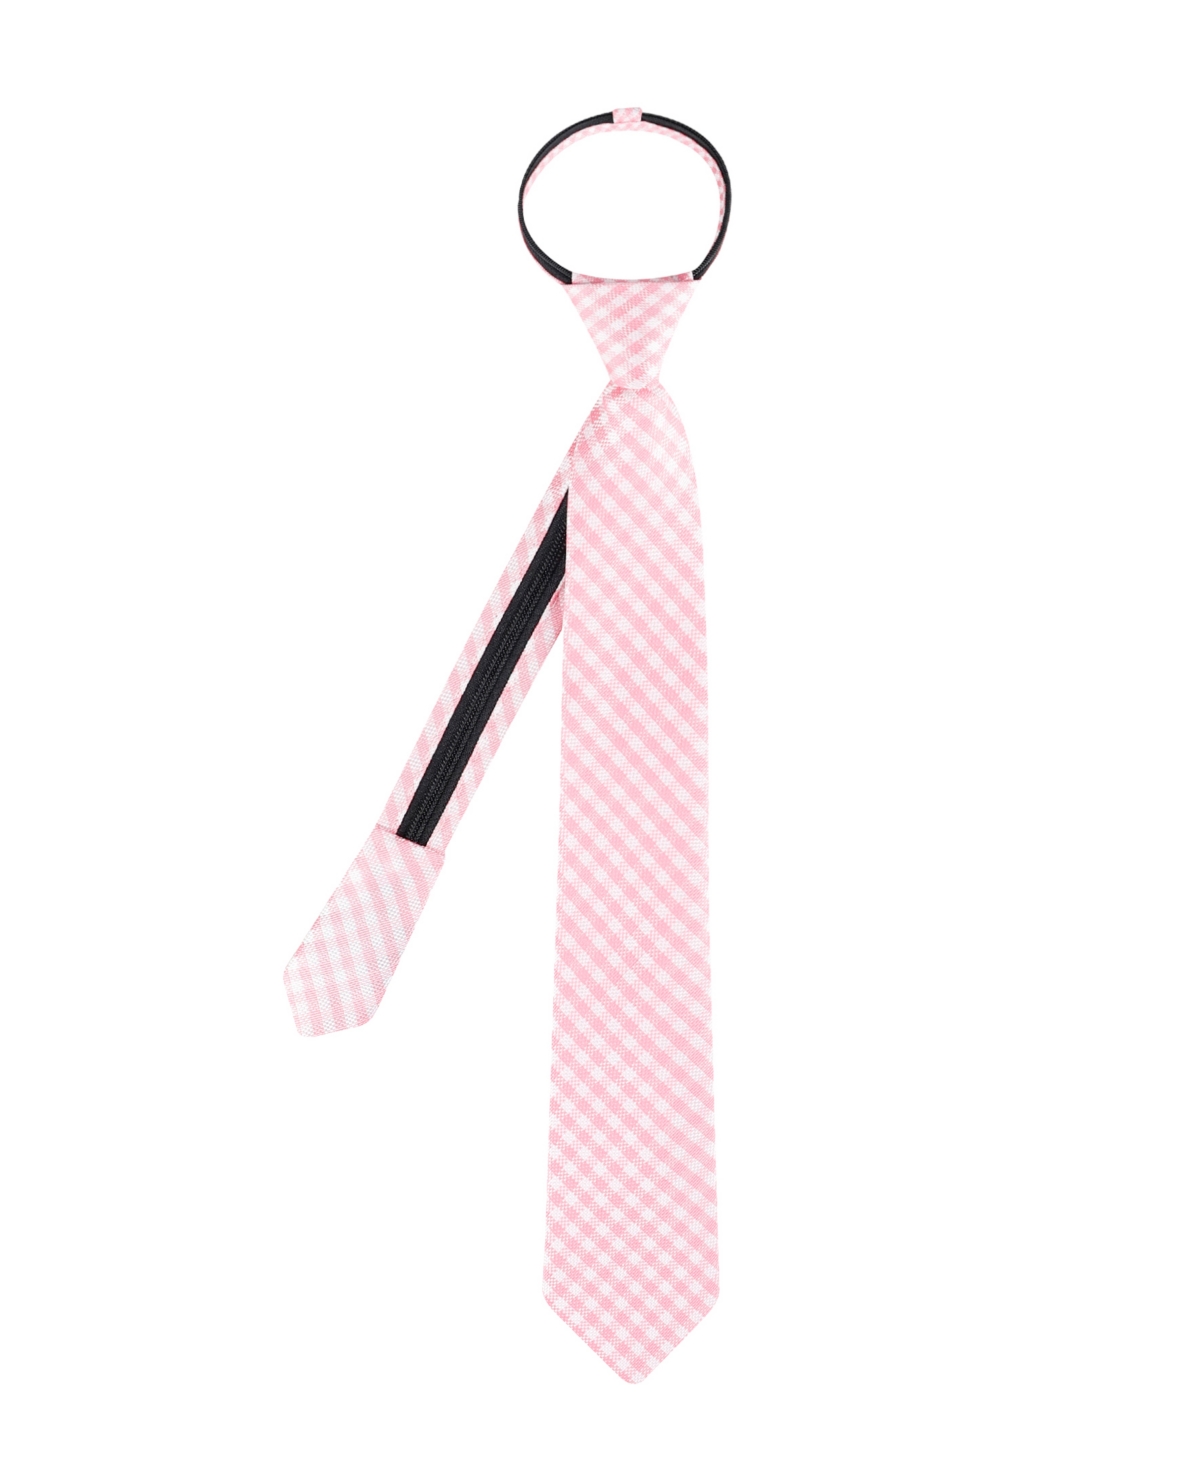 Tommy Hilfiger Kids' Boys Gingham Check Pre-tied Zipper Tie In Pink